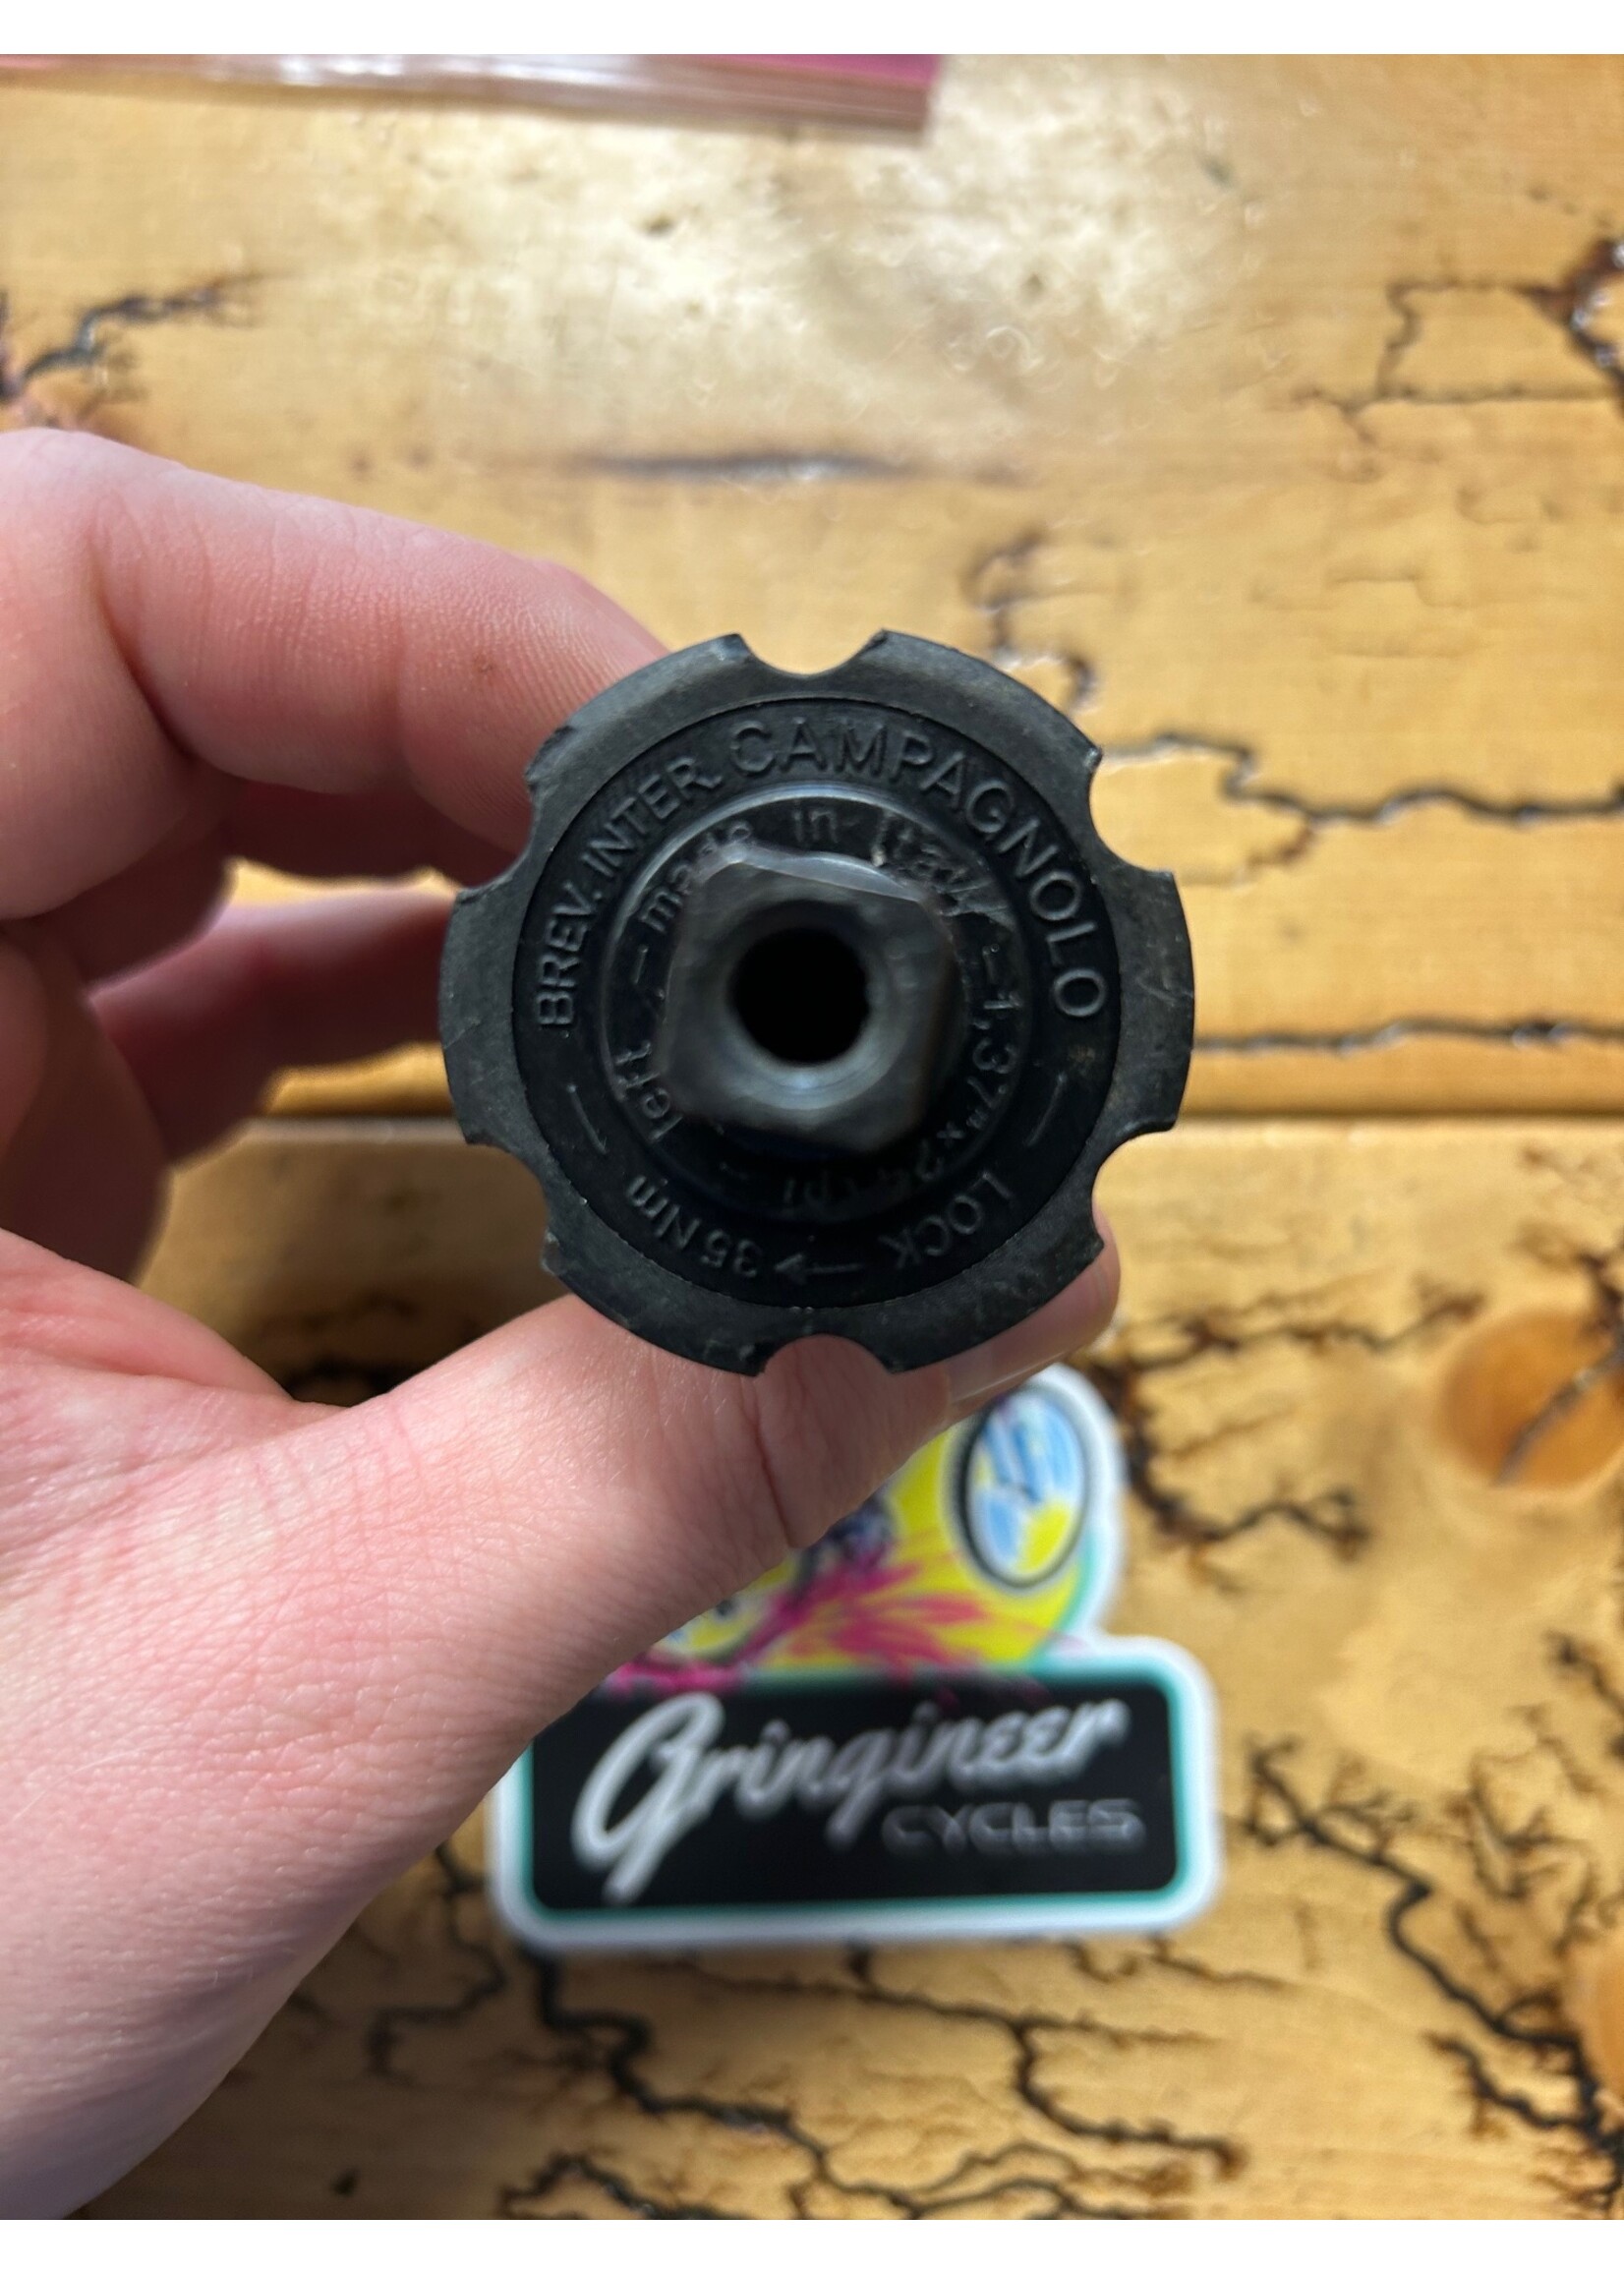 Campagnolo Campagnolo 112mm Square Taper English Threaded Bottom Bracket